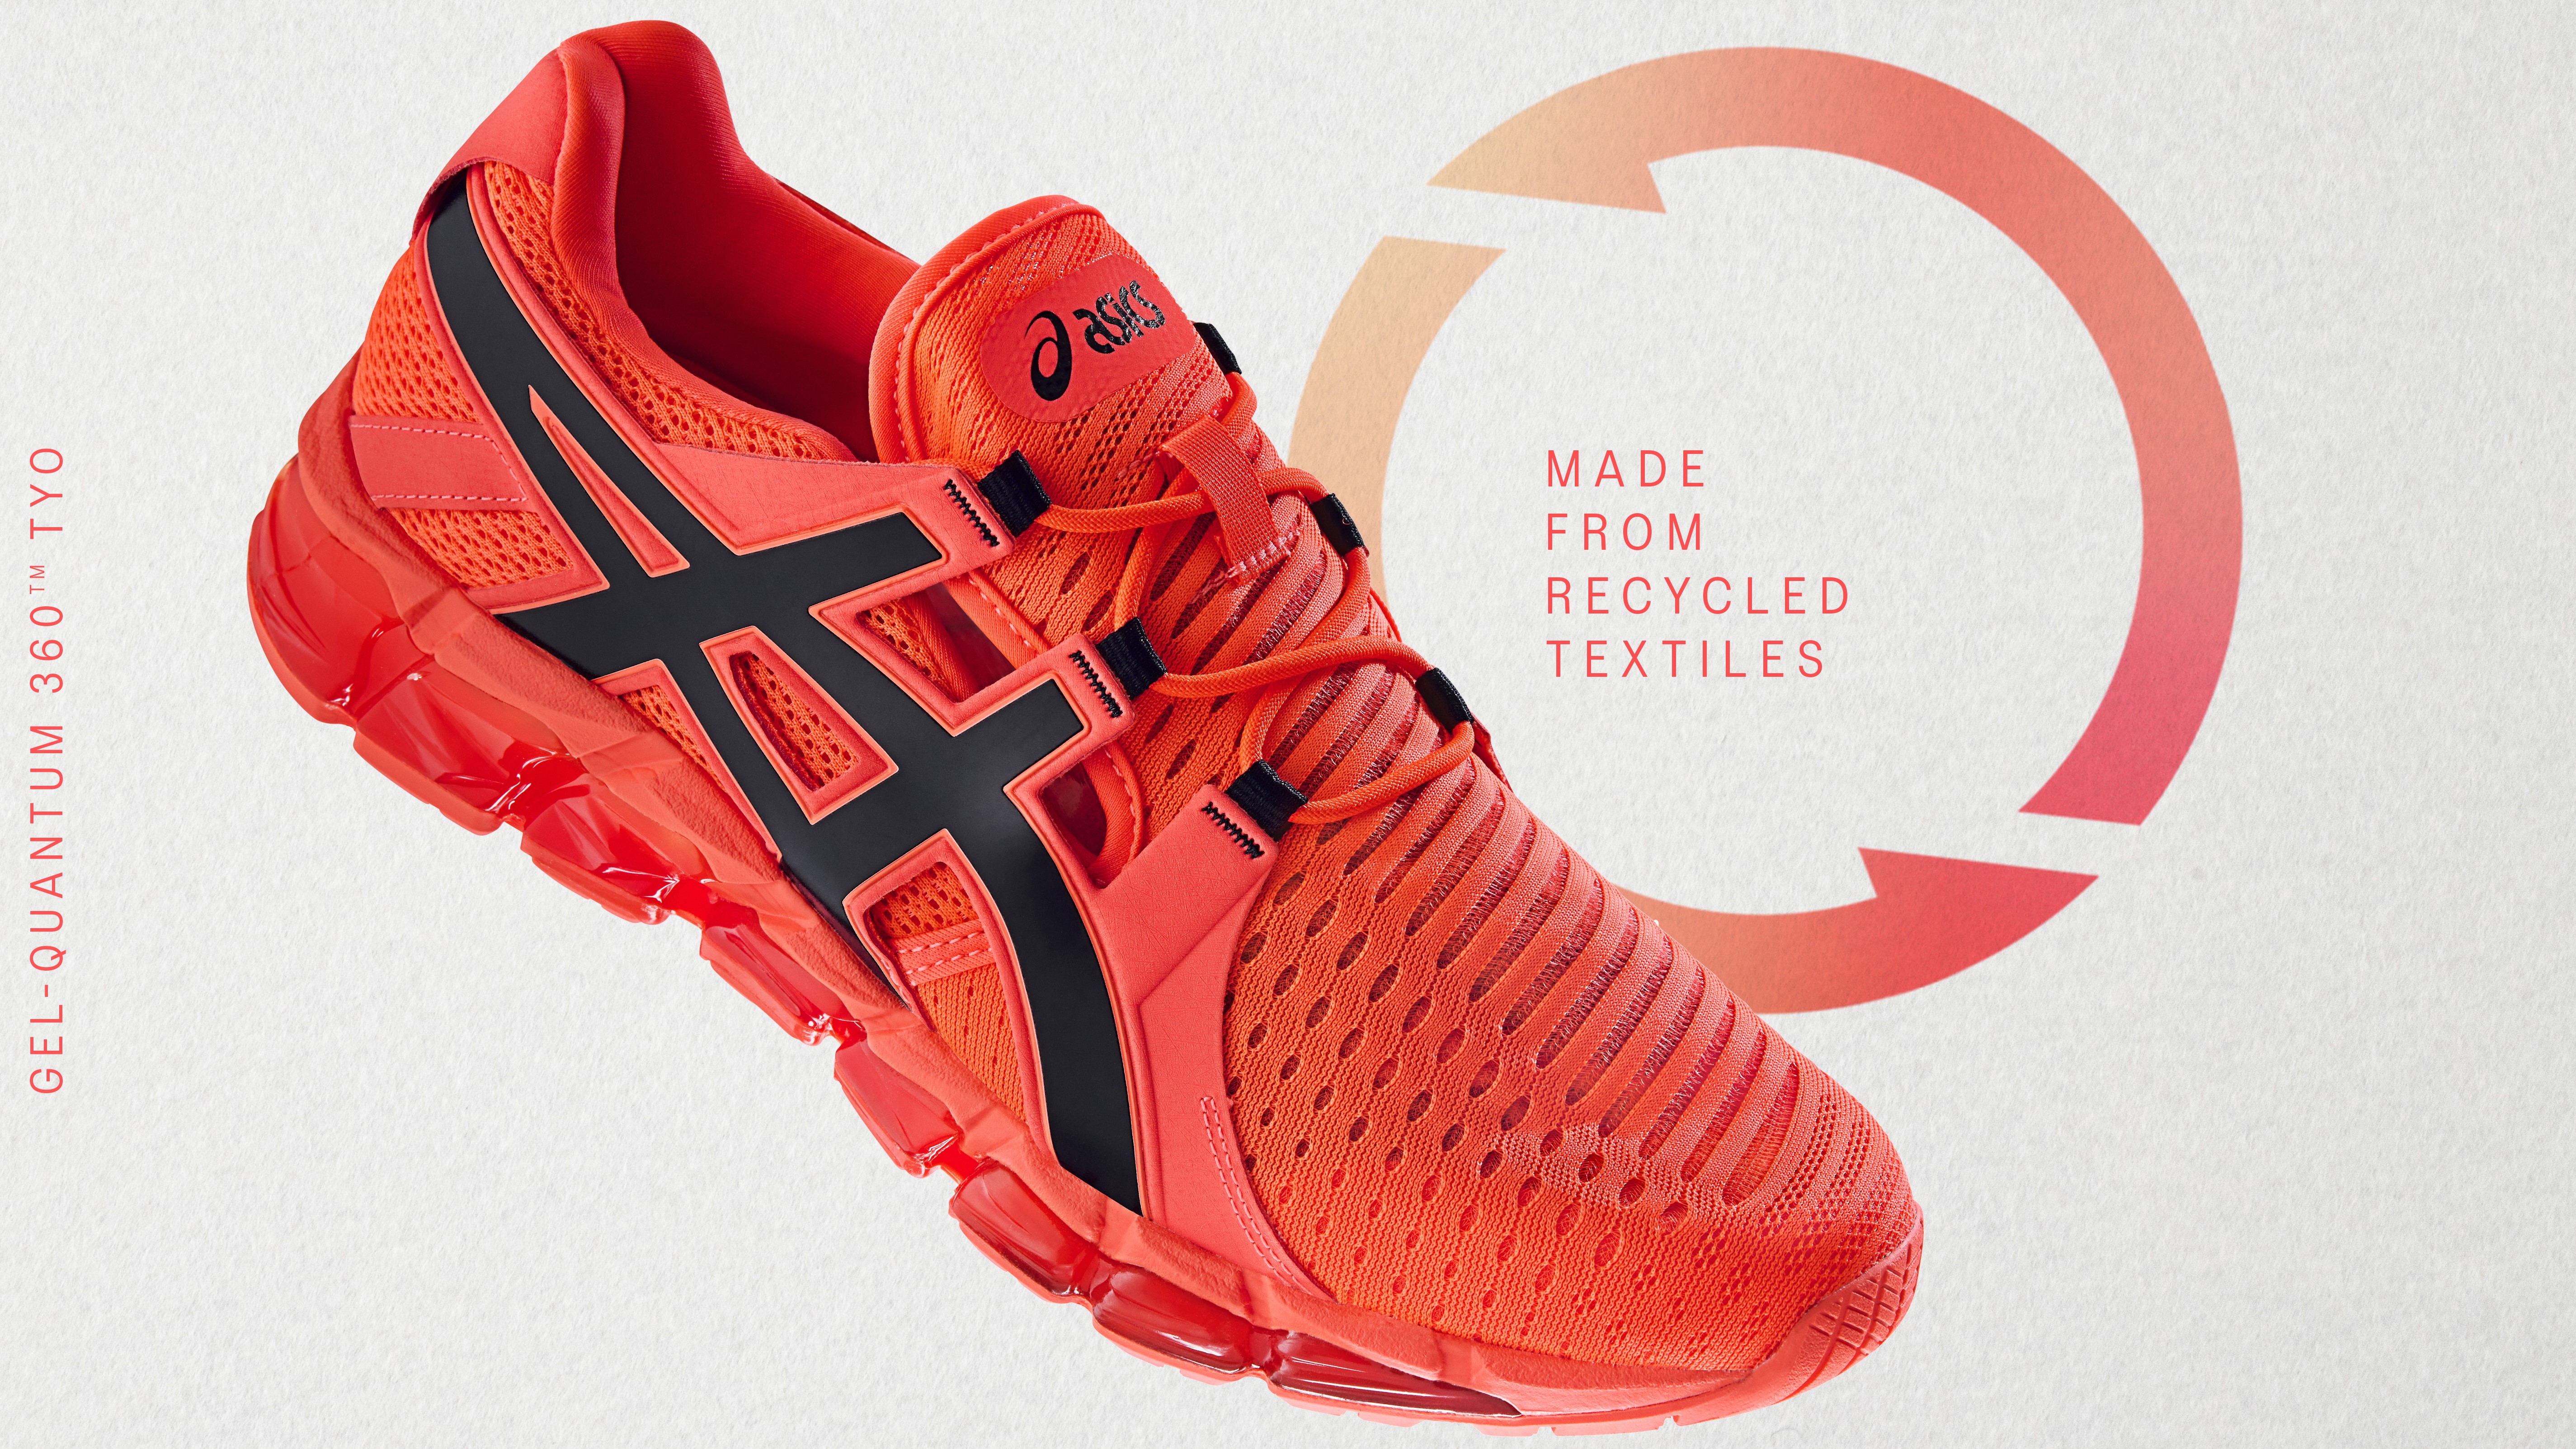 Asics launches sustainable new running shoes made from recycled clothes |  TechRadar